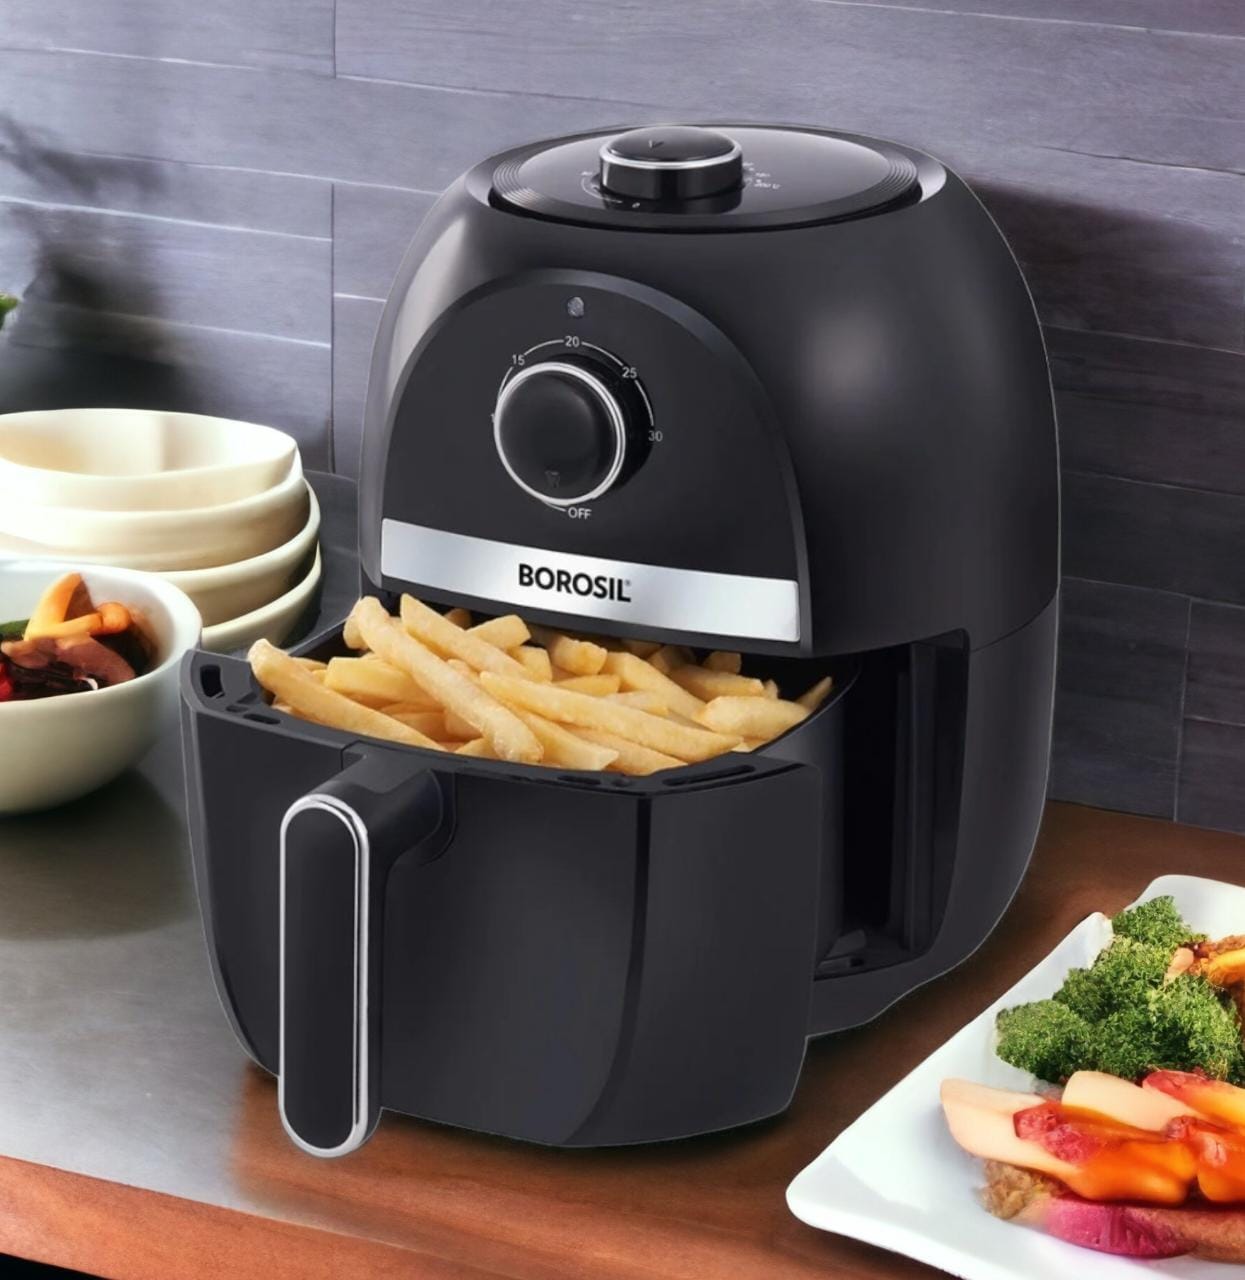 KENT Classic Hot Air Fryer 4 Litres - Buy Online at Best Price in India